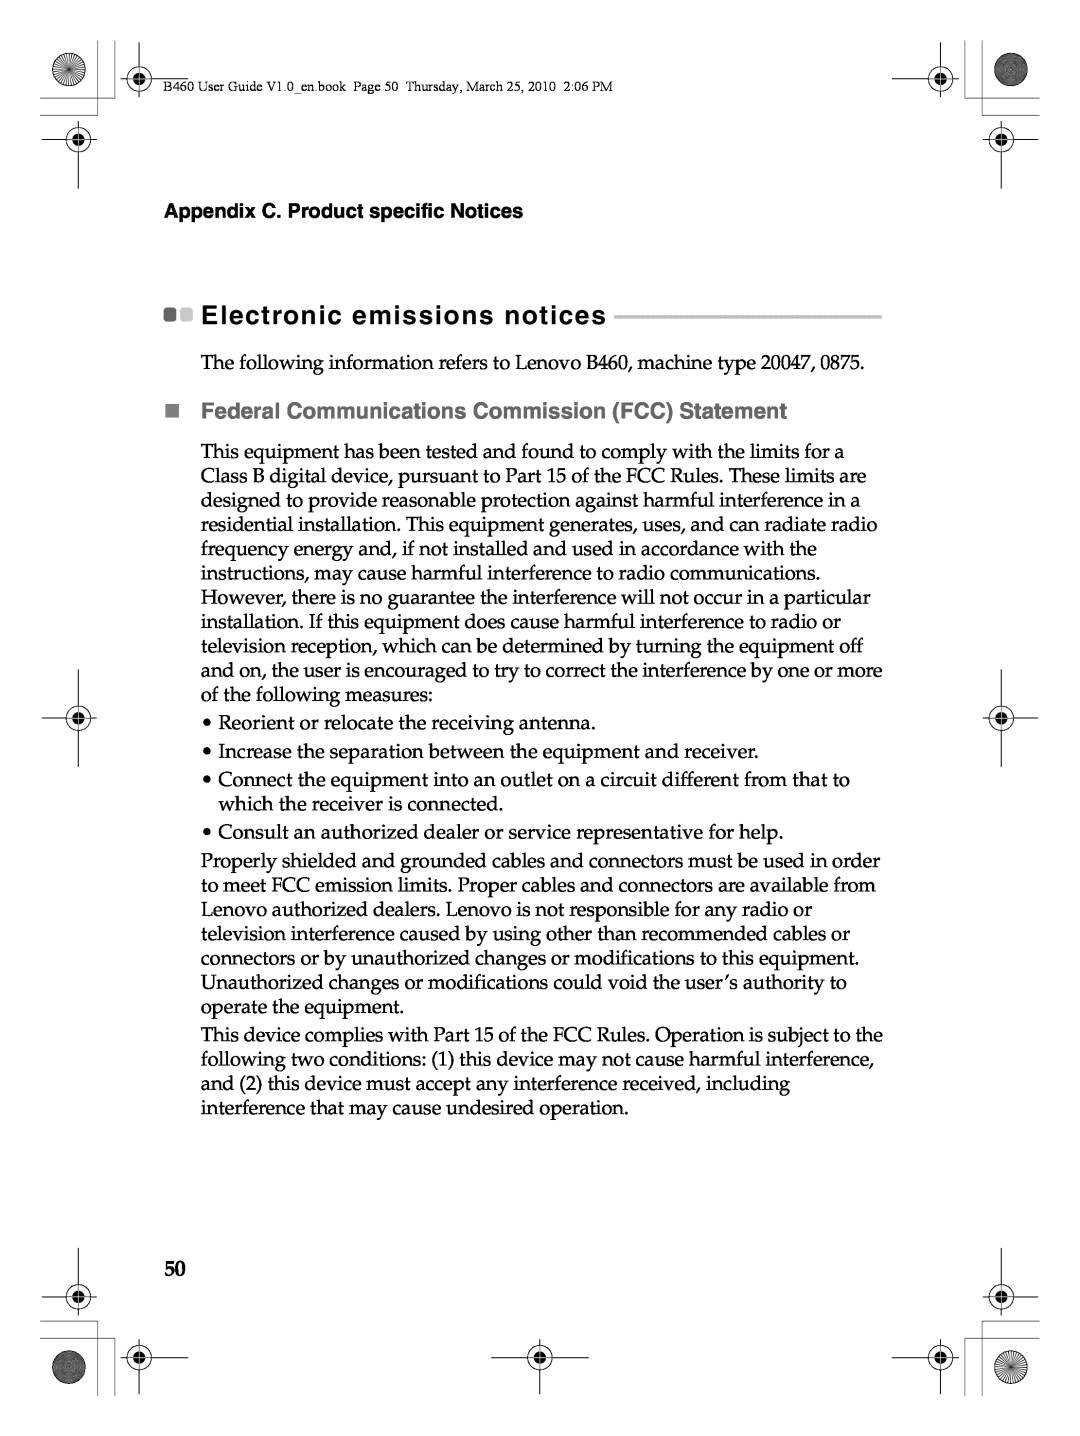 Lenovo B460 manual Electronic emissions notices, „ Federal Communications Commission FCC Statement 